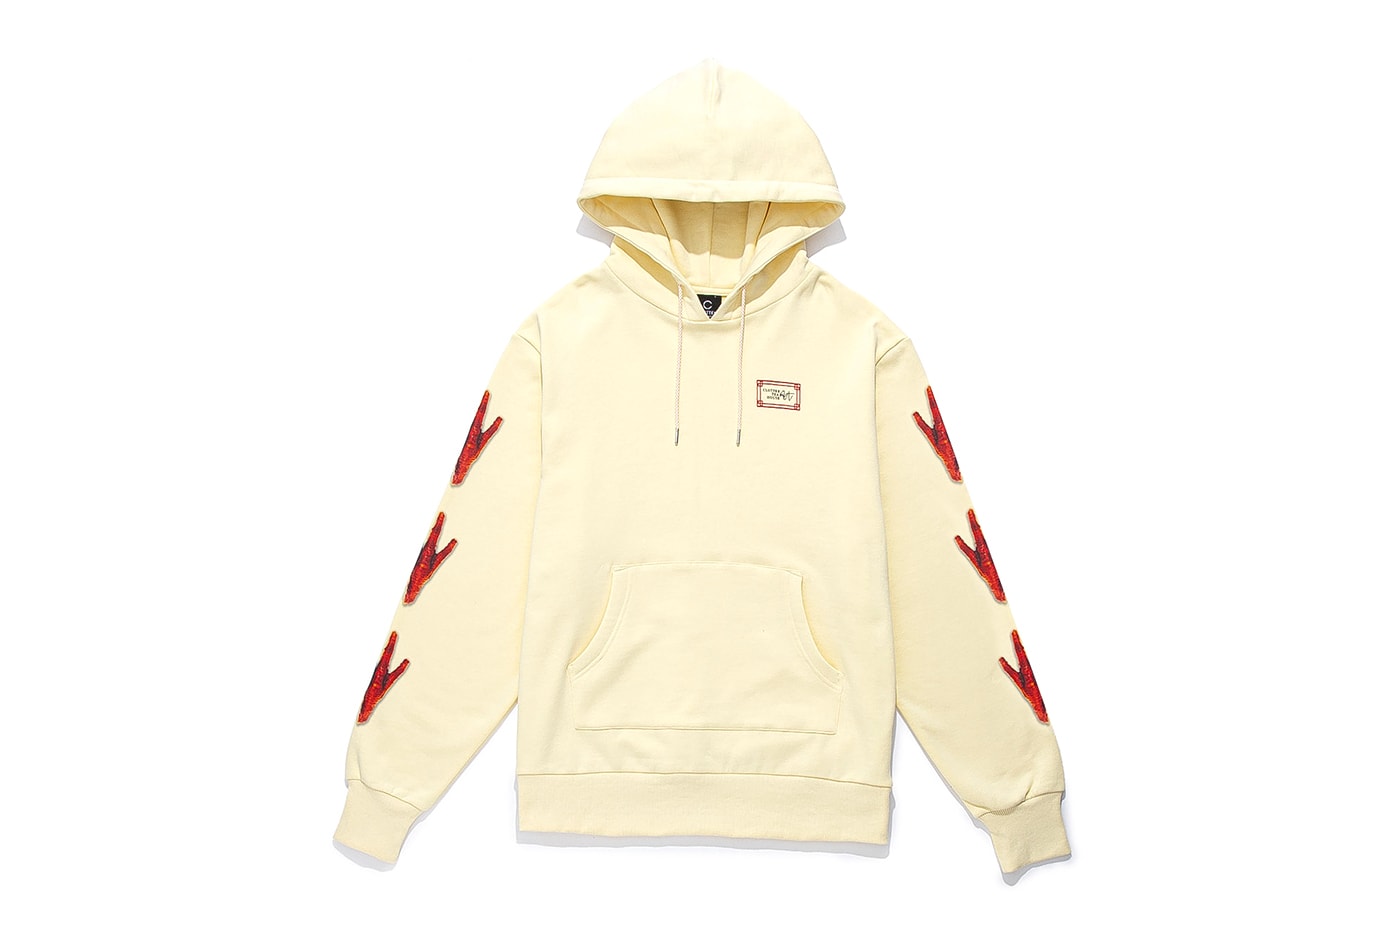 CLOTTEE by CLOT Spring 2020 Dim Sum Collection Release Info Buy Price hoodie shirt sweater t shirt bag hat accessories 